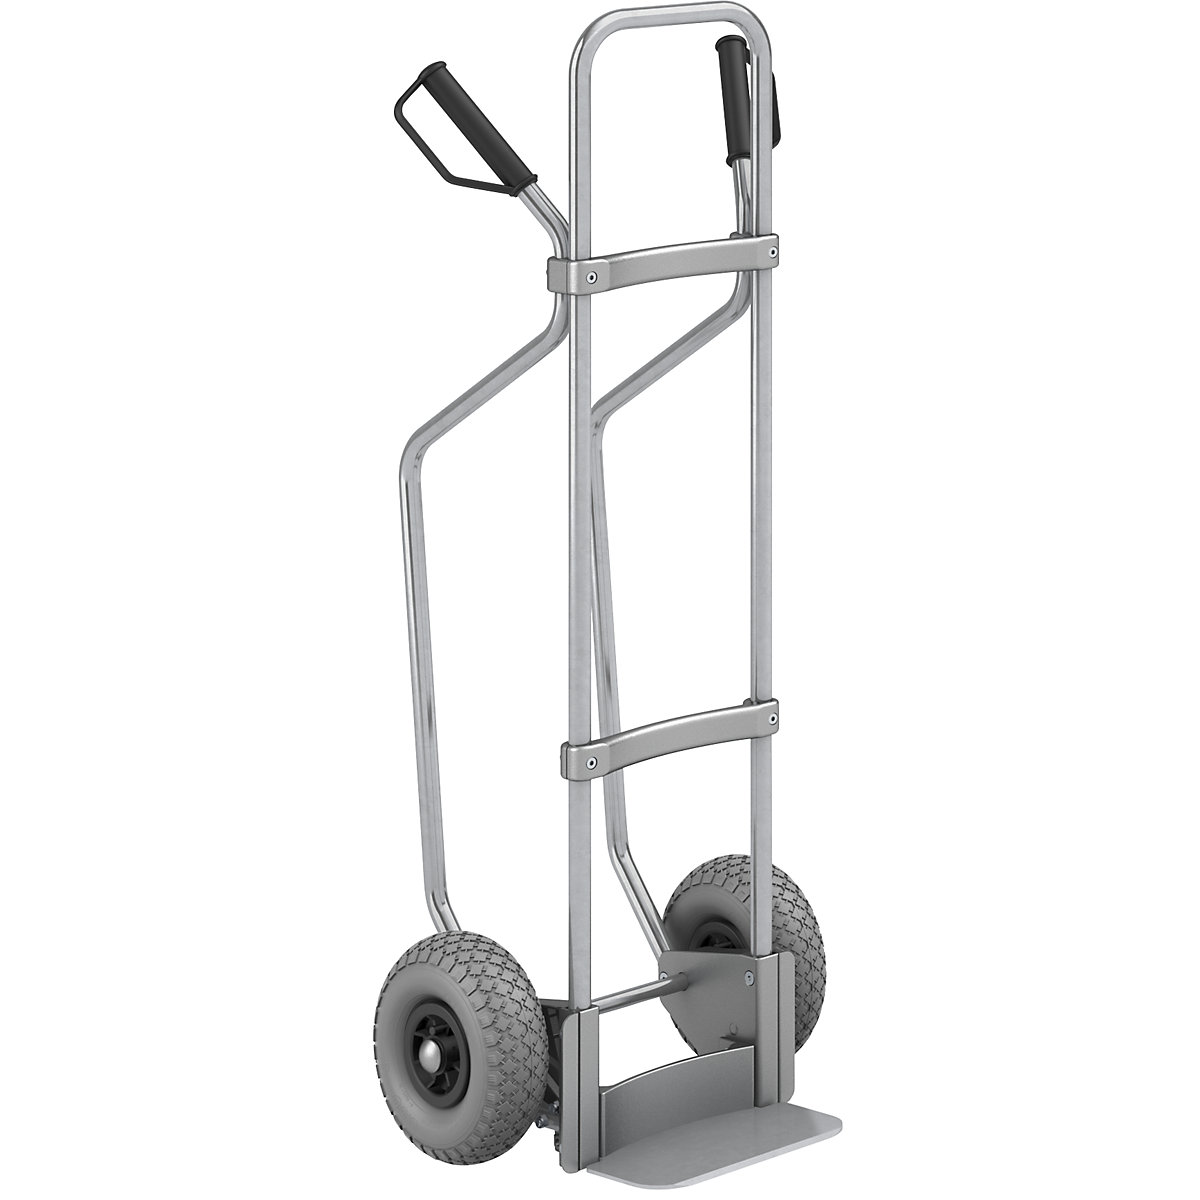 Sack truck with runners, zinc plated – eurokraft pro, footplate WxD 280 x 140 mm, zinc plated, PU tyres, 5+ items-2